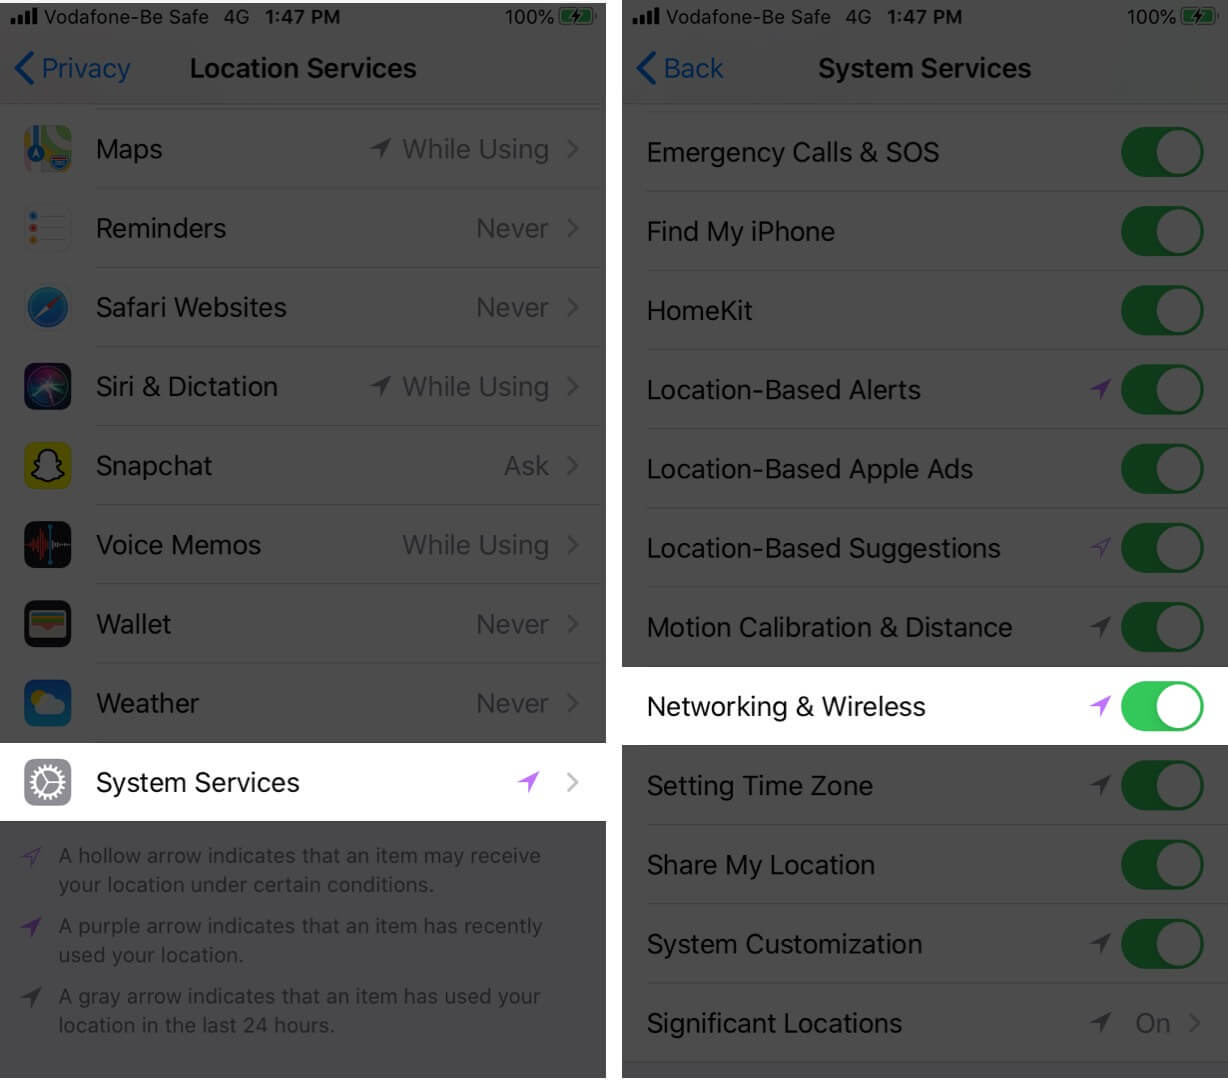 Make Sure Networking and Wireless Services is Enabled on iPhone